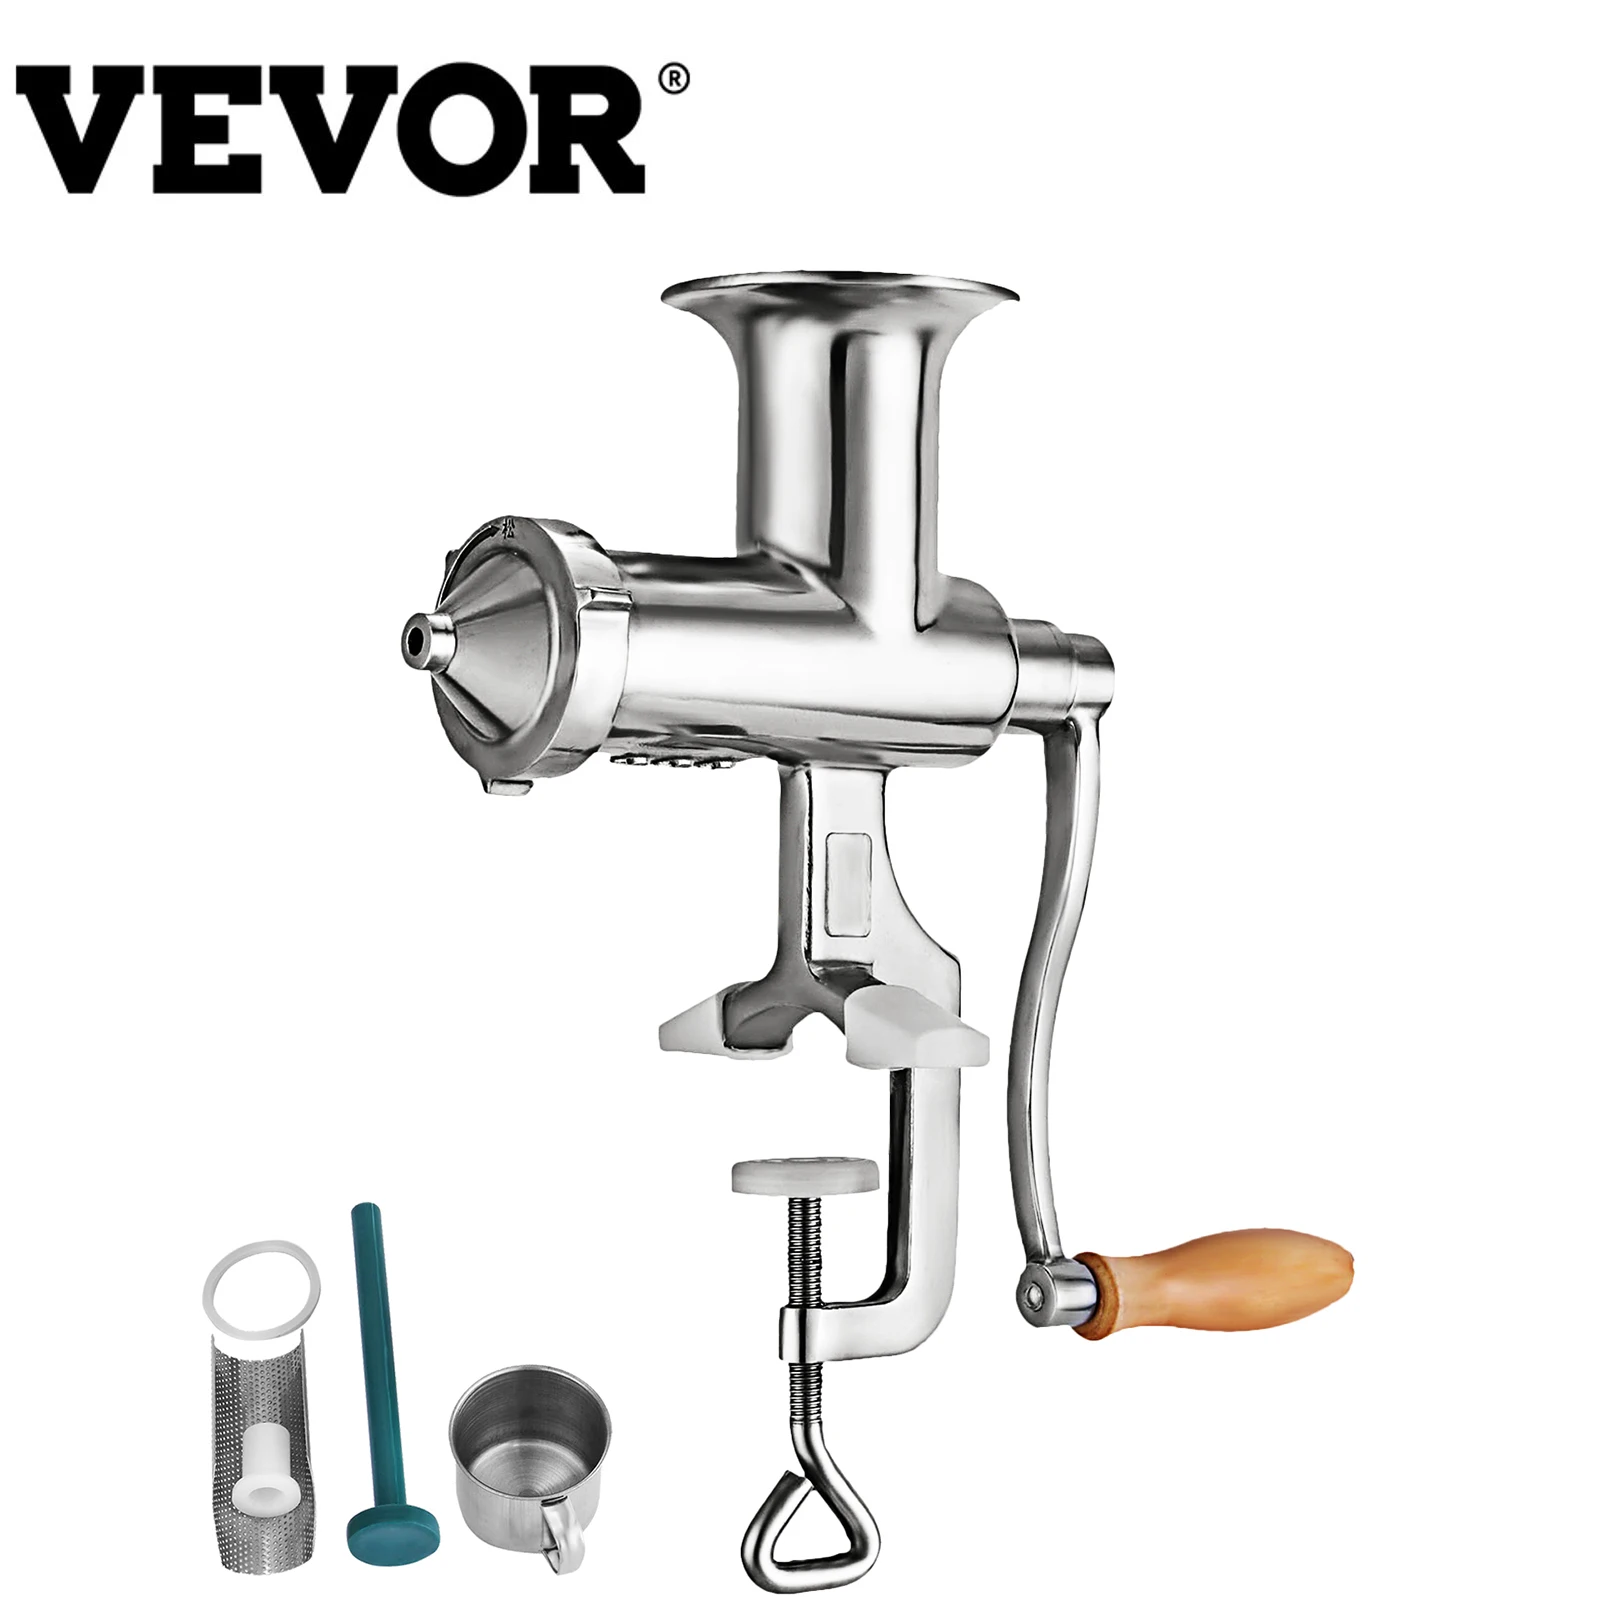 VEVOR 2.2” Manual Wheatgrass Juicer W/ Multiple Accessories Stainless Steel Food Grade Juice Extractor Auger Slow Squeezer Home